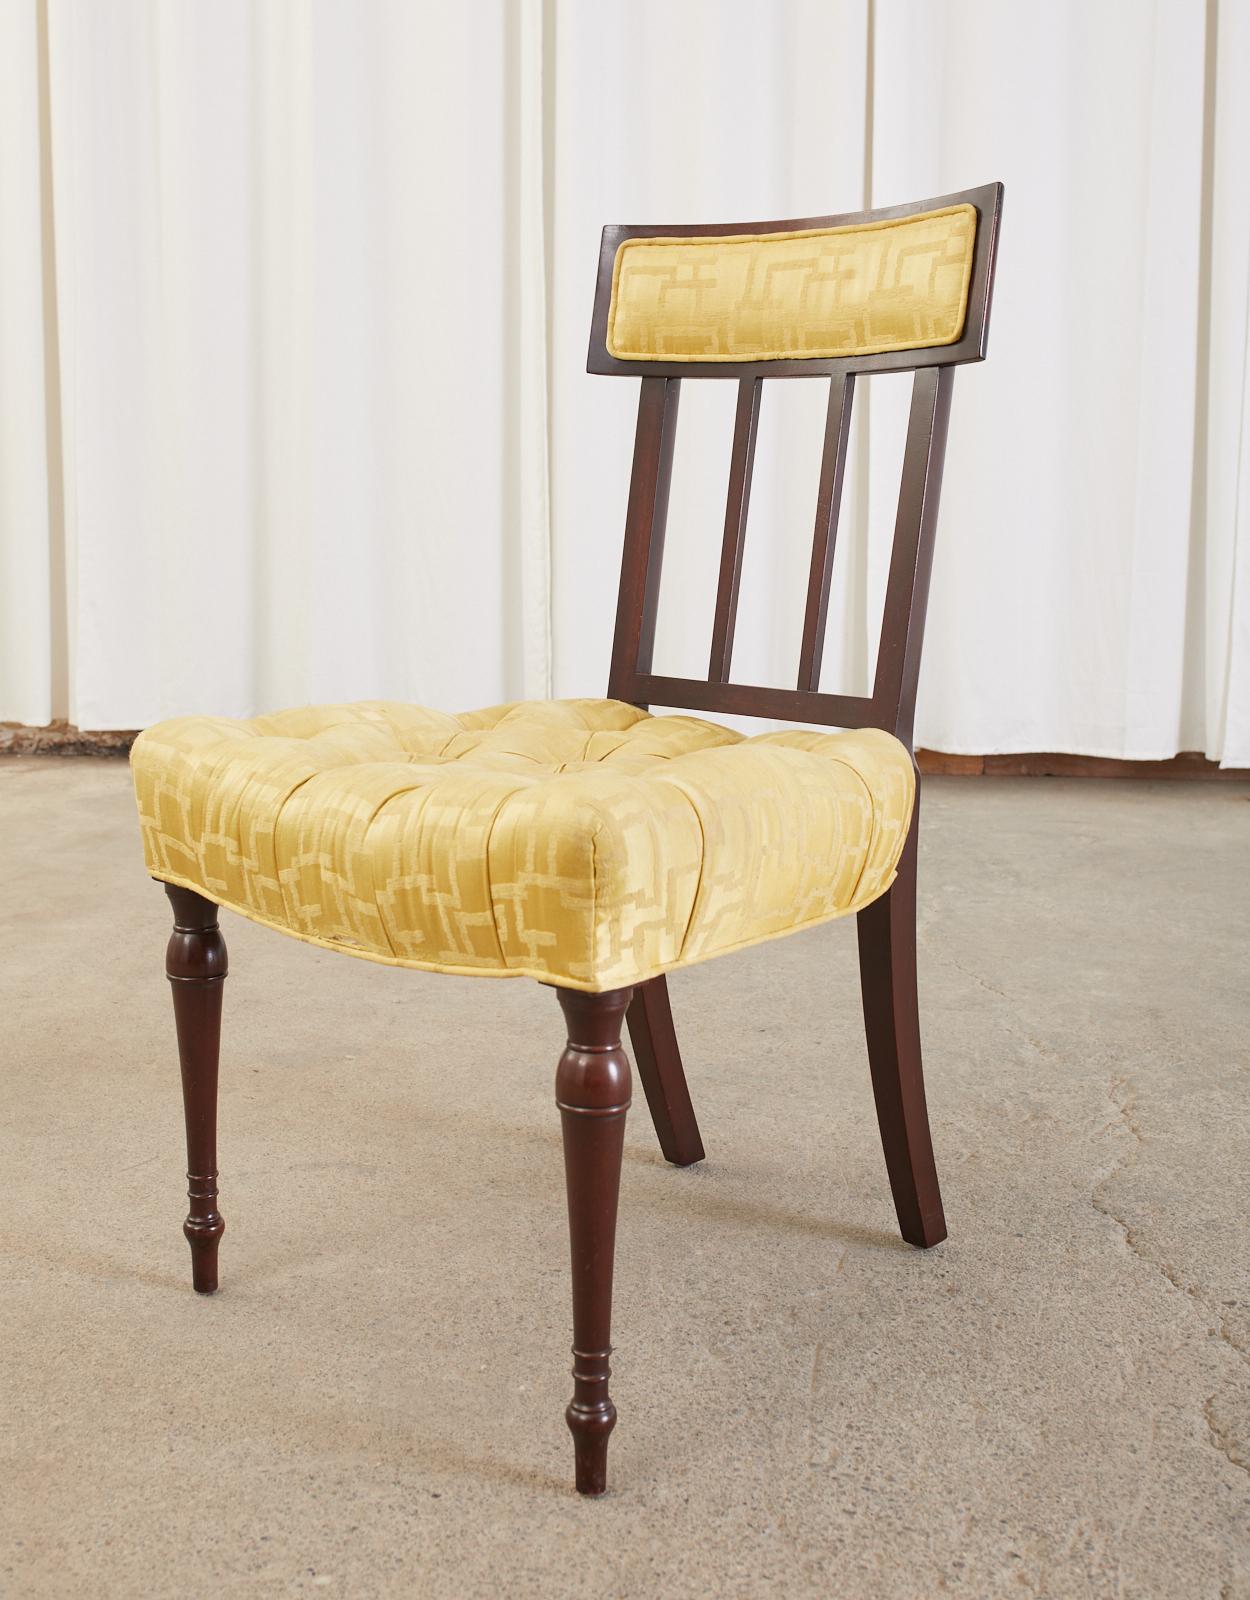 Extraordinary set of six English regency dining chairs crafted from mahogany. The chairs feature a rectangular tablet klismos style back rest conjoined to a generous curved seat. Upholstered with a thick seat having a golden geometric pattern